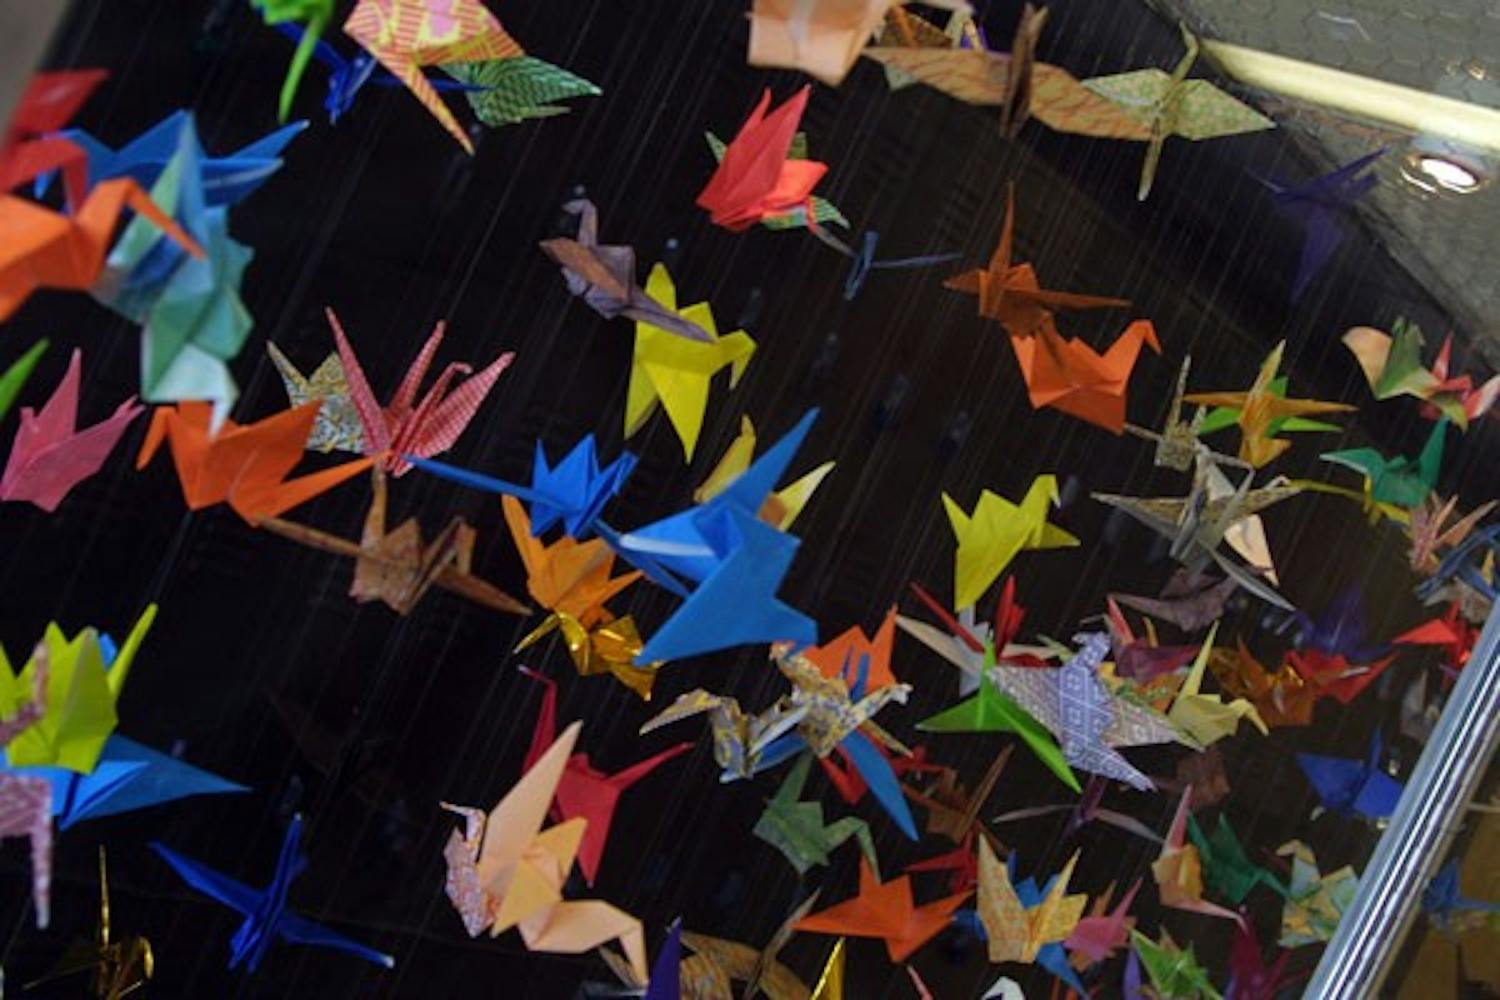 WISHFUL THINKING: Hundreds of paper cranes hang in a display inside the Art building. Each crane encompasses a wish made by the students who folded them. (Photo by Serwaa Adu-Tutu)